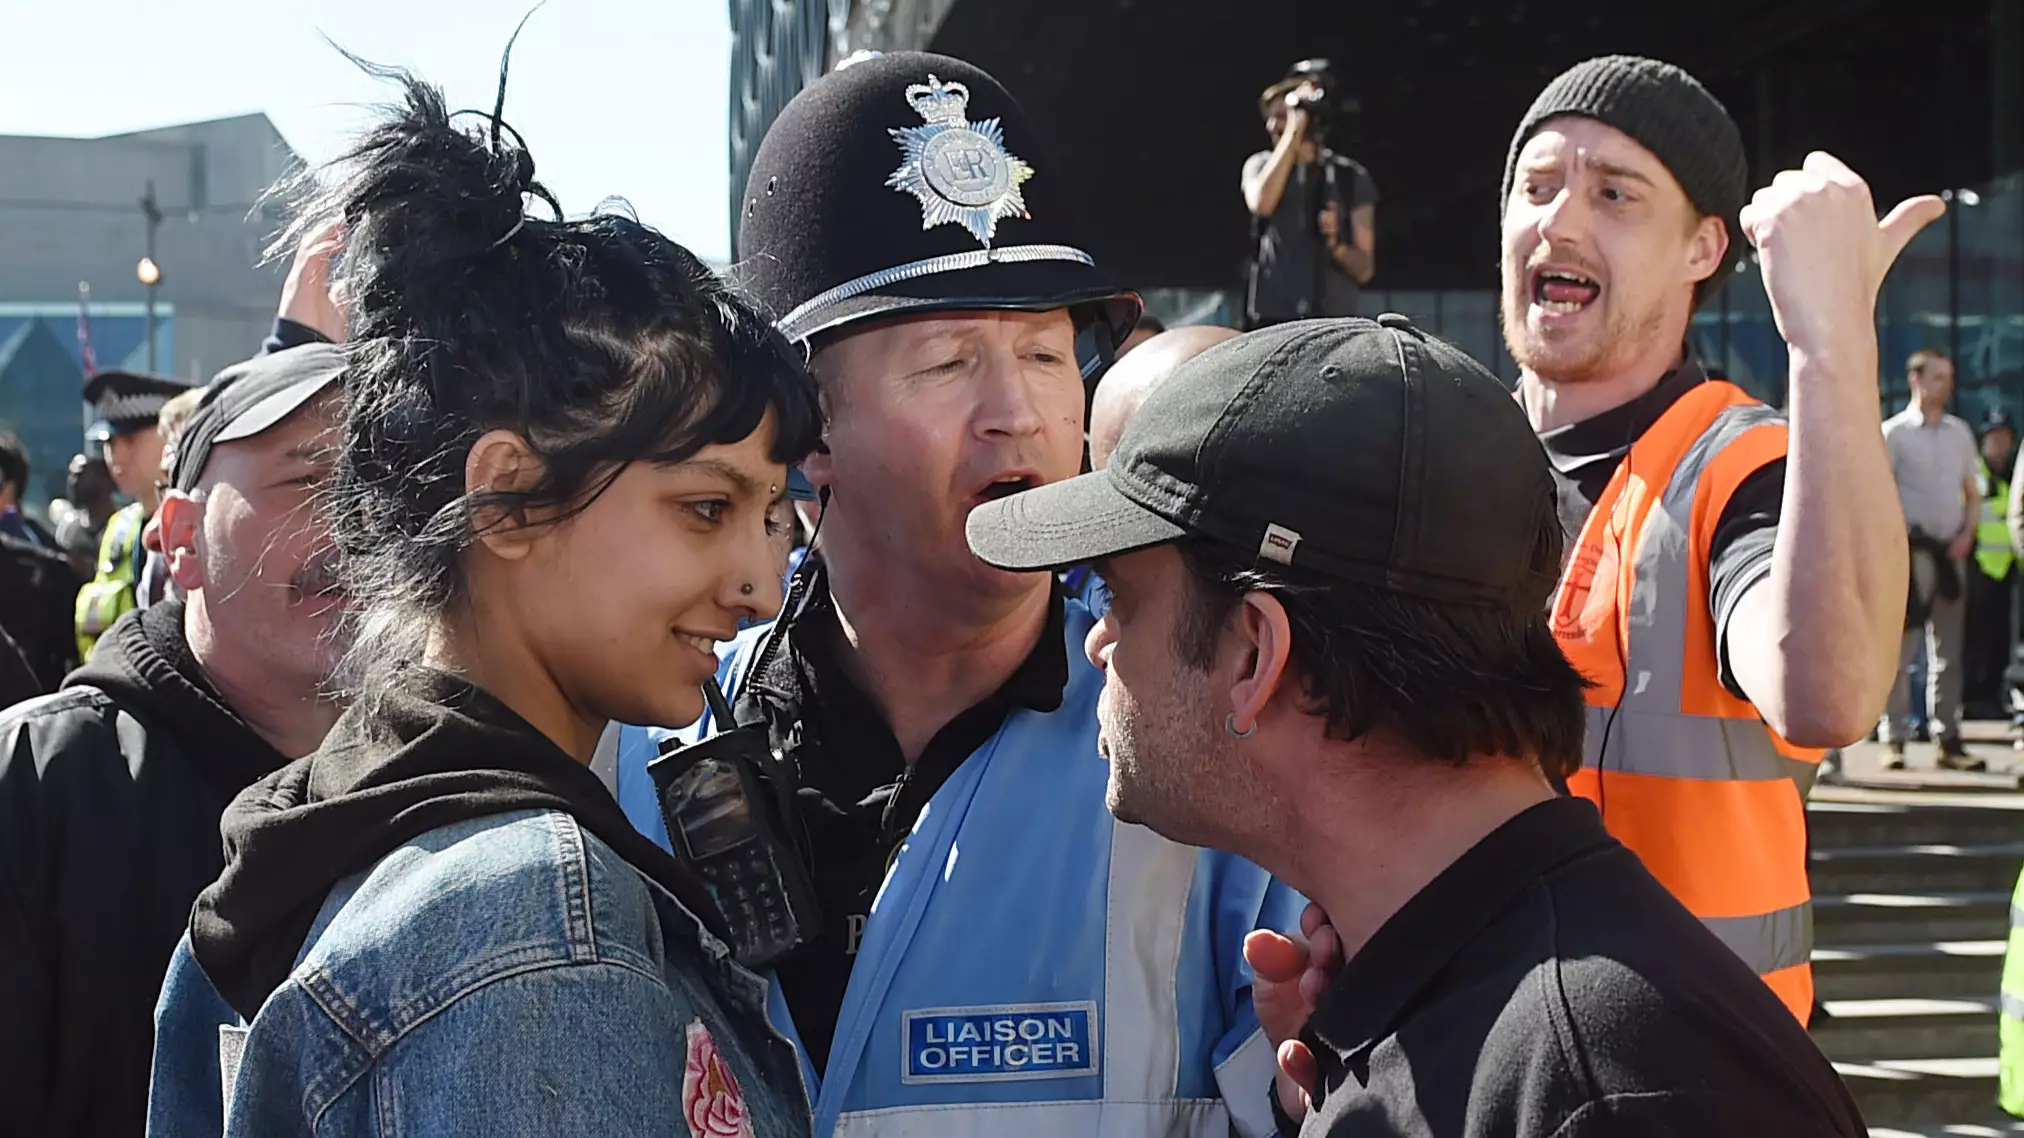 Incredible Picture Of 'Contemptuous' Woman Smiling At EDL Protester Goes Viral